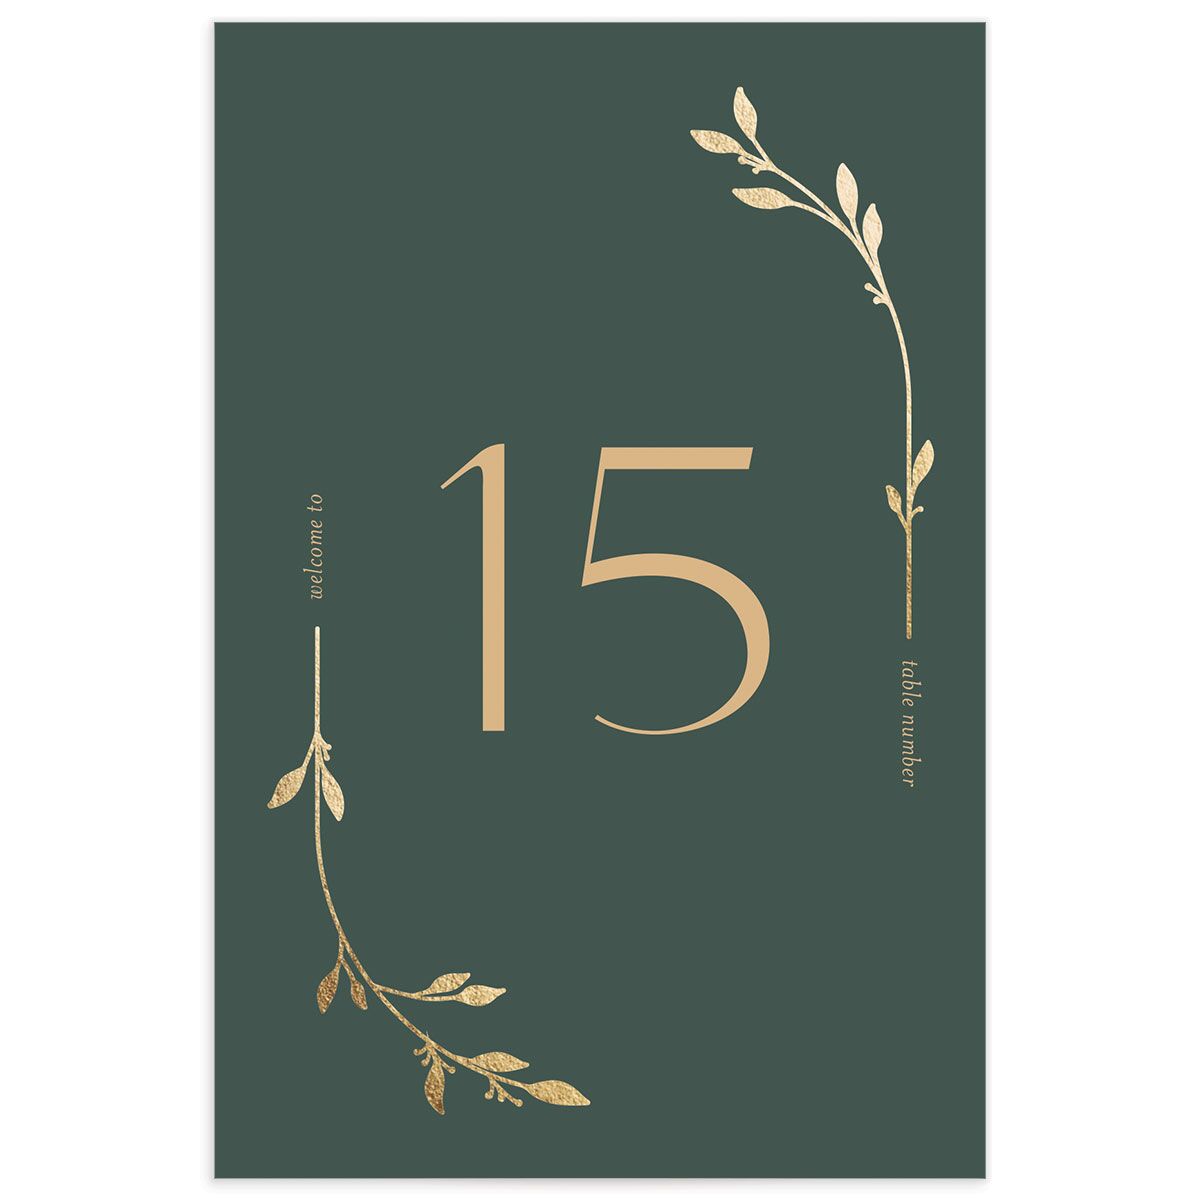 Gilded Sprigs Foil Table Numbers front in Green